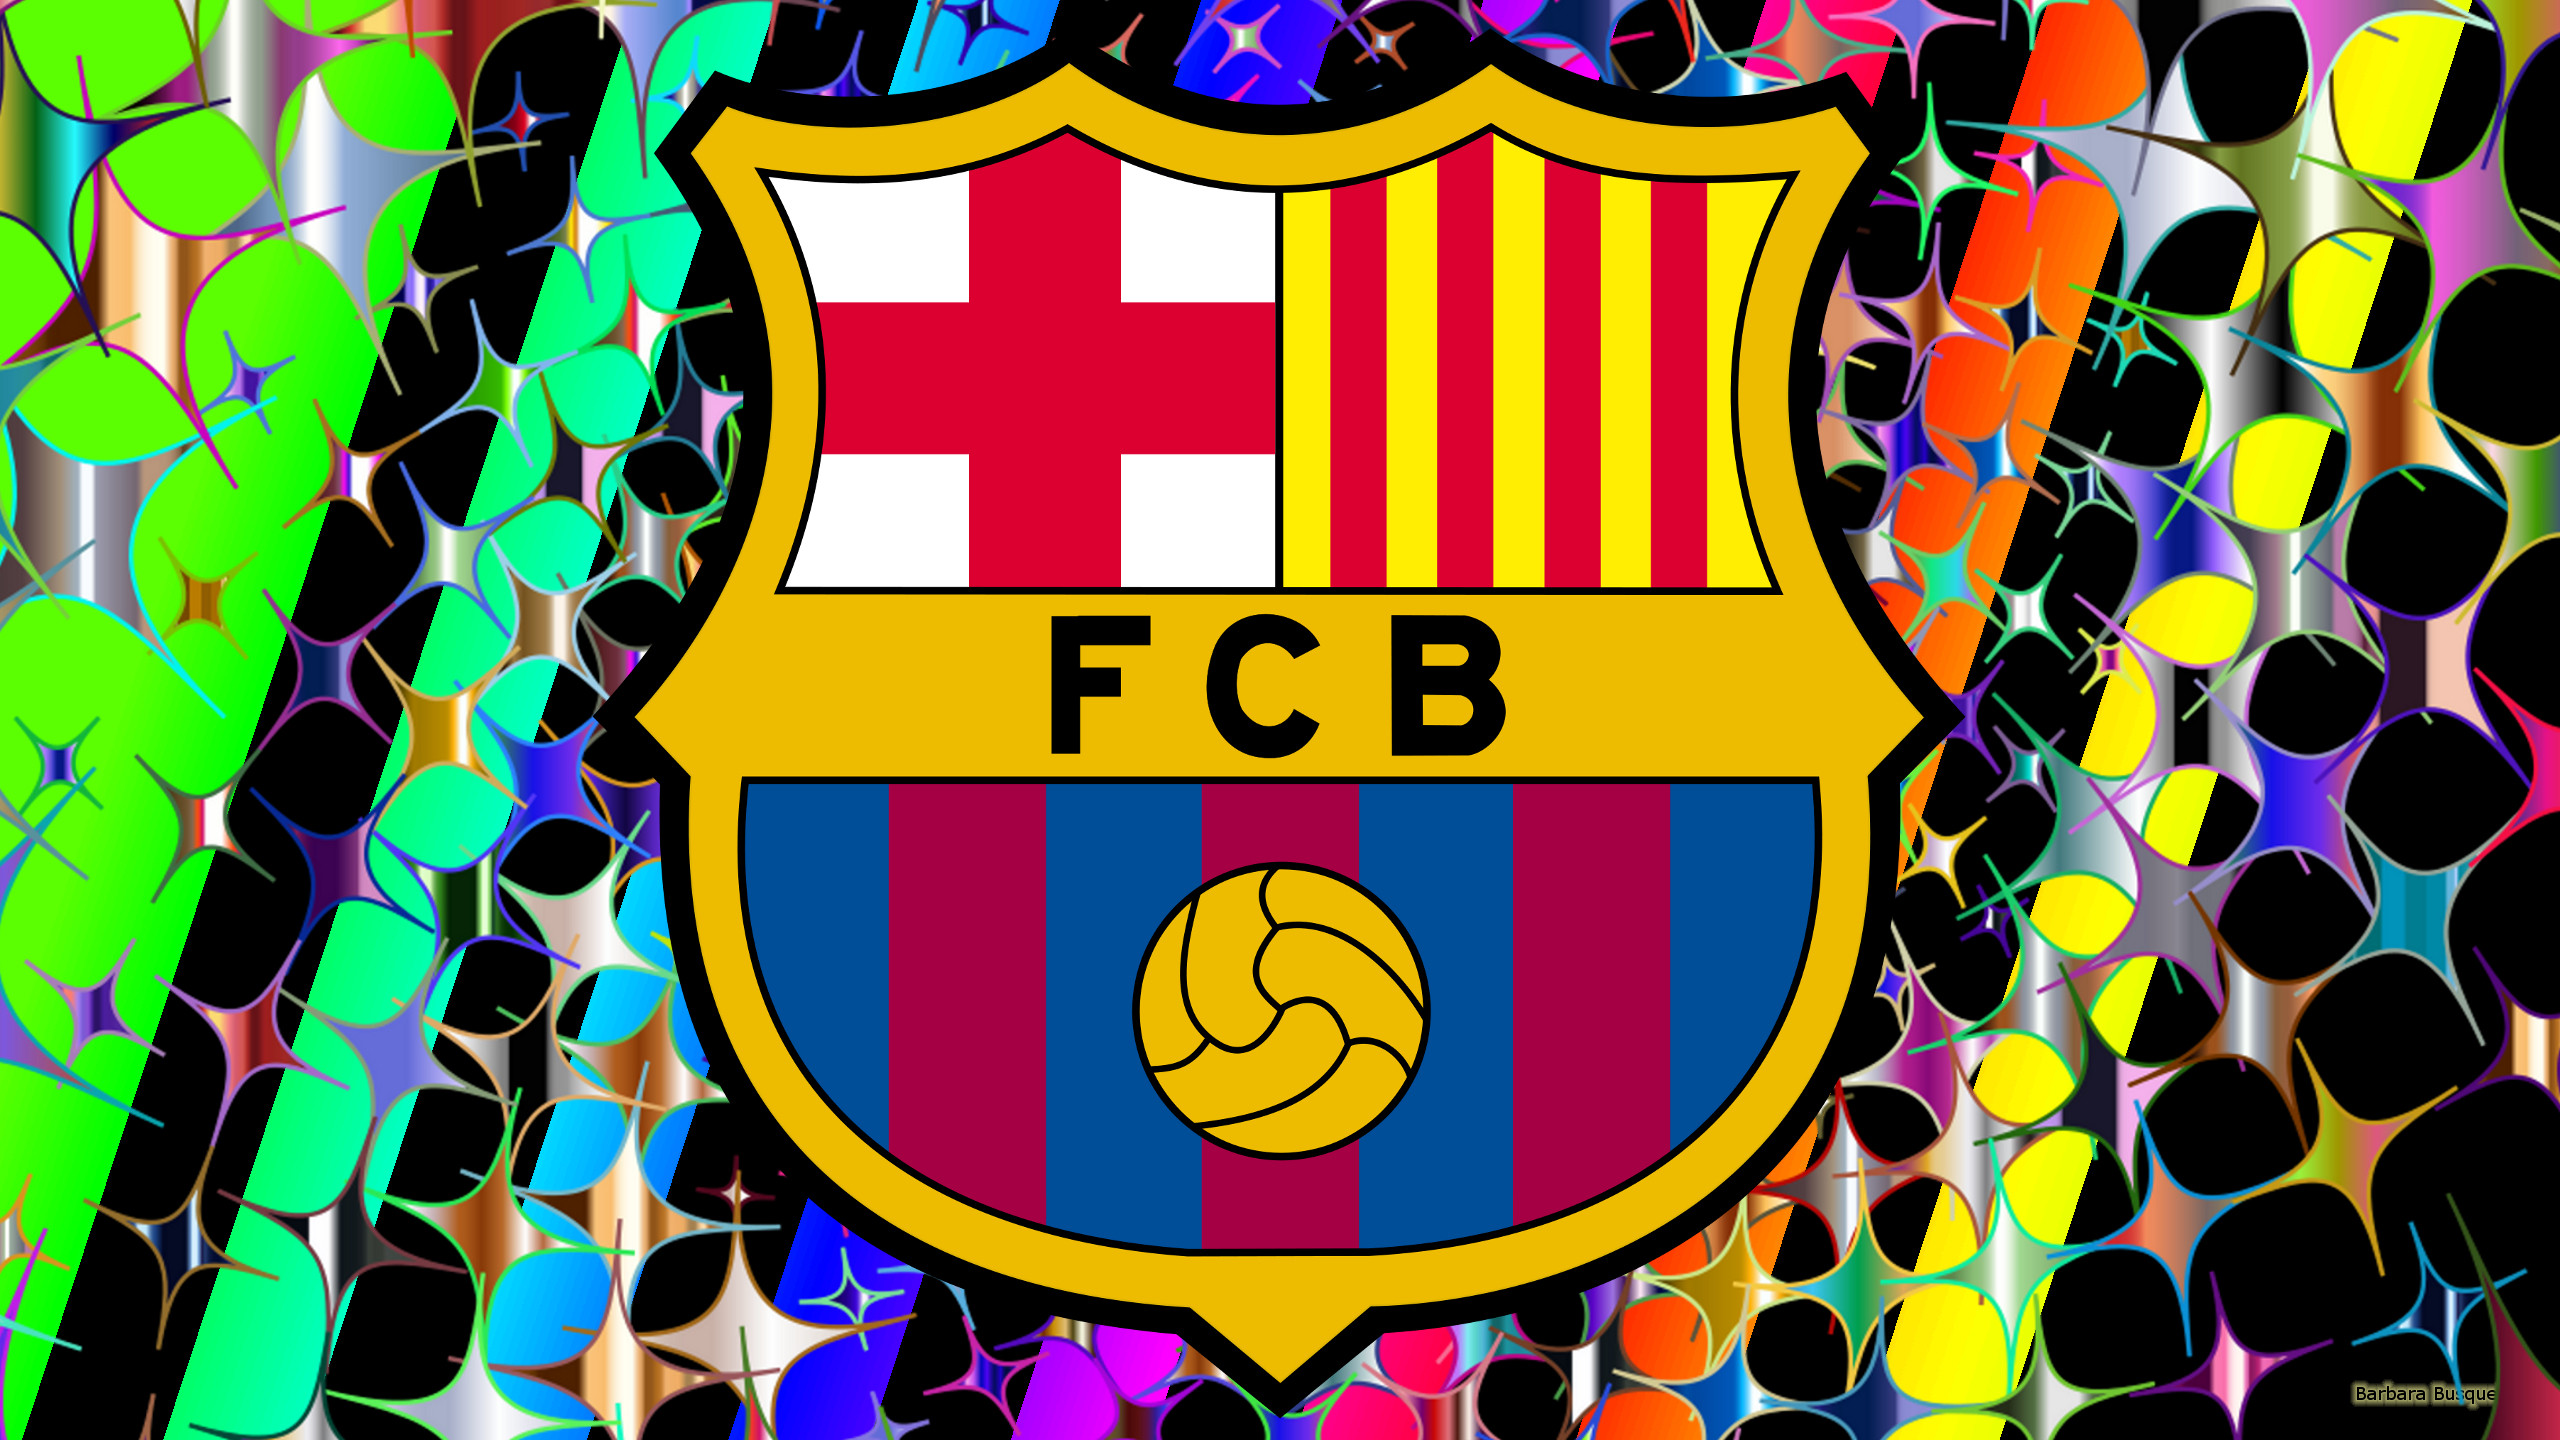 football club wallpapers,psychedelic art,font,graphics,visual arts,pattern